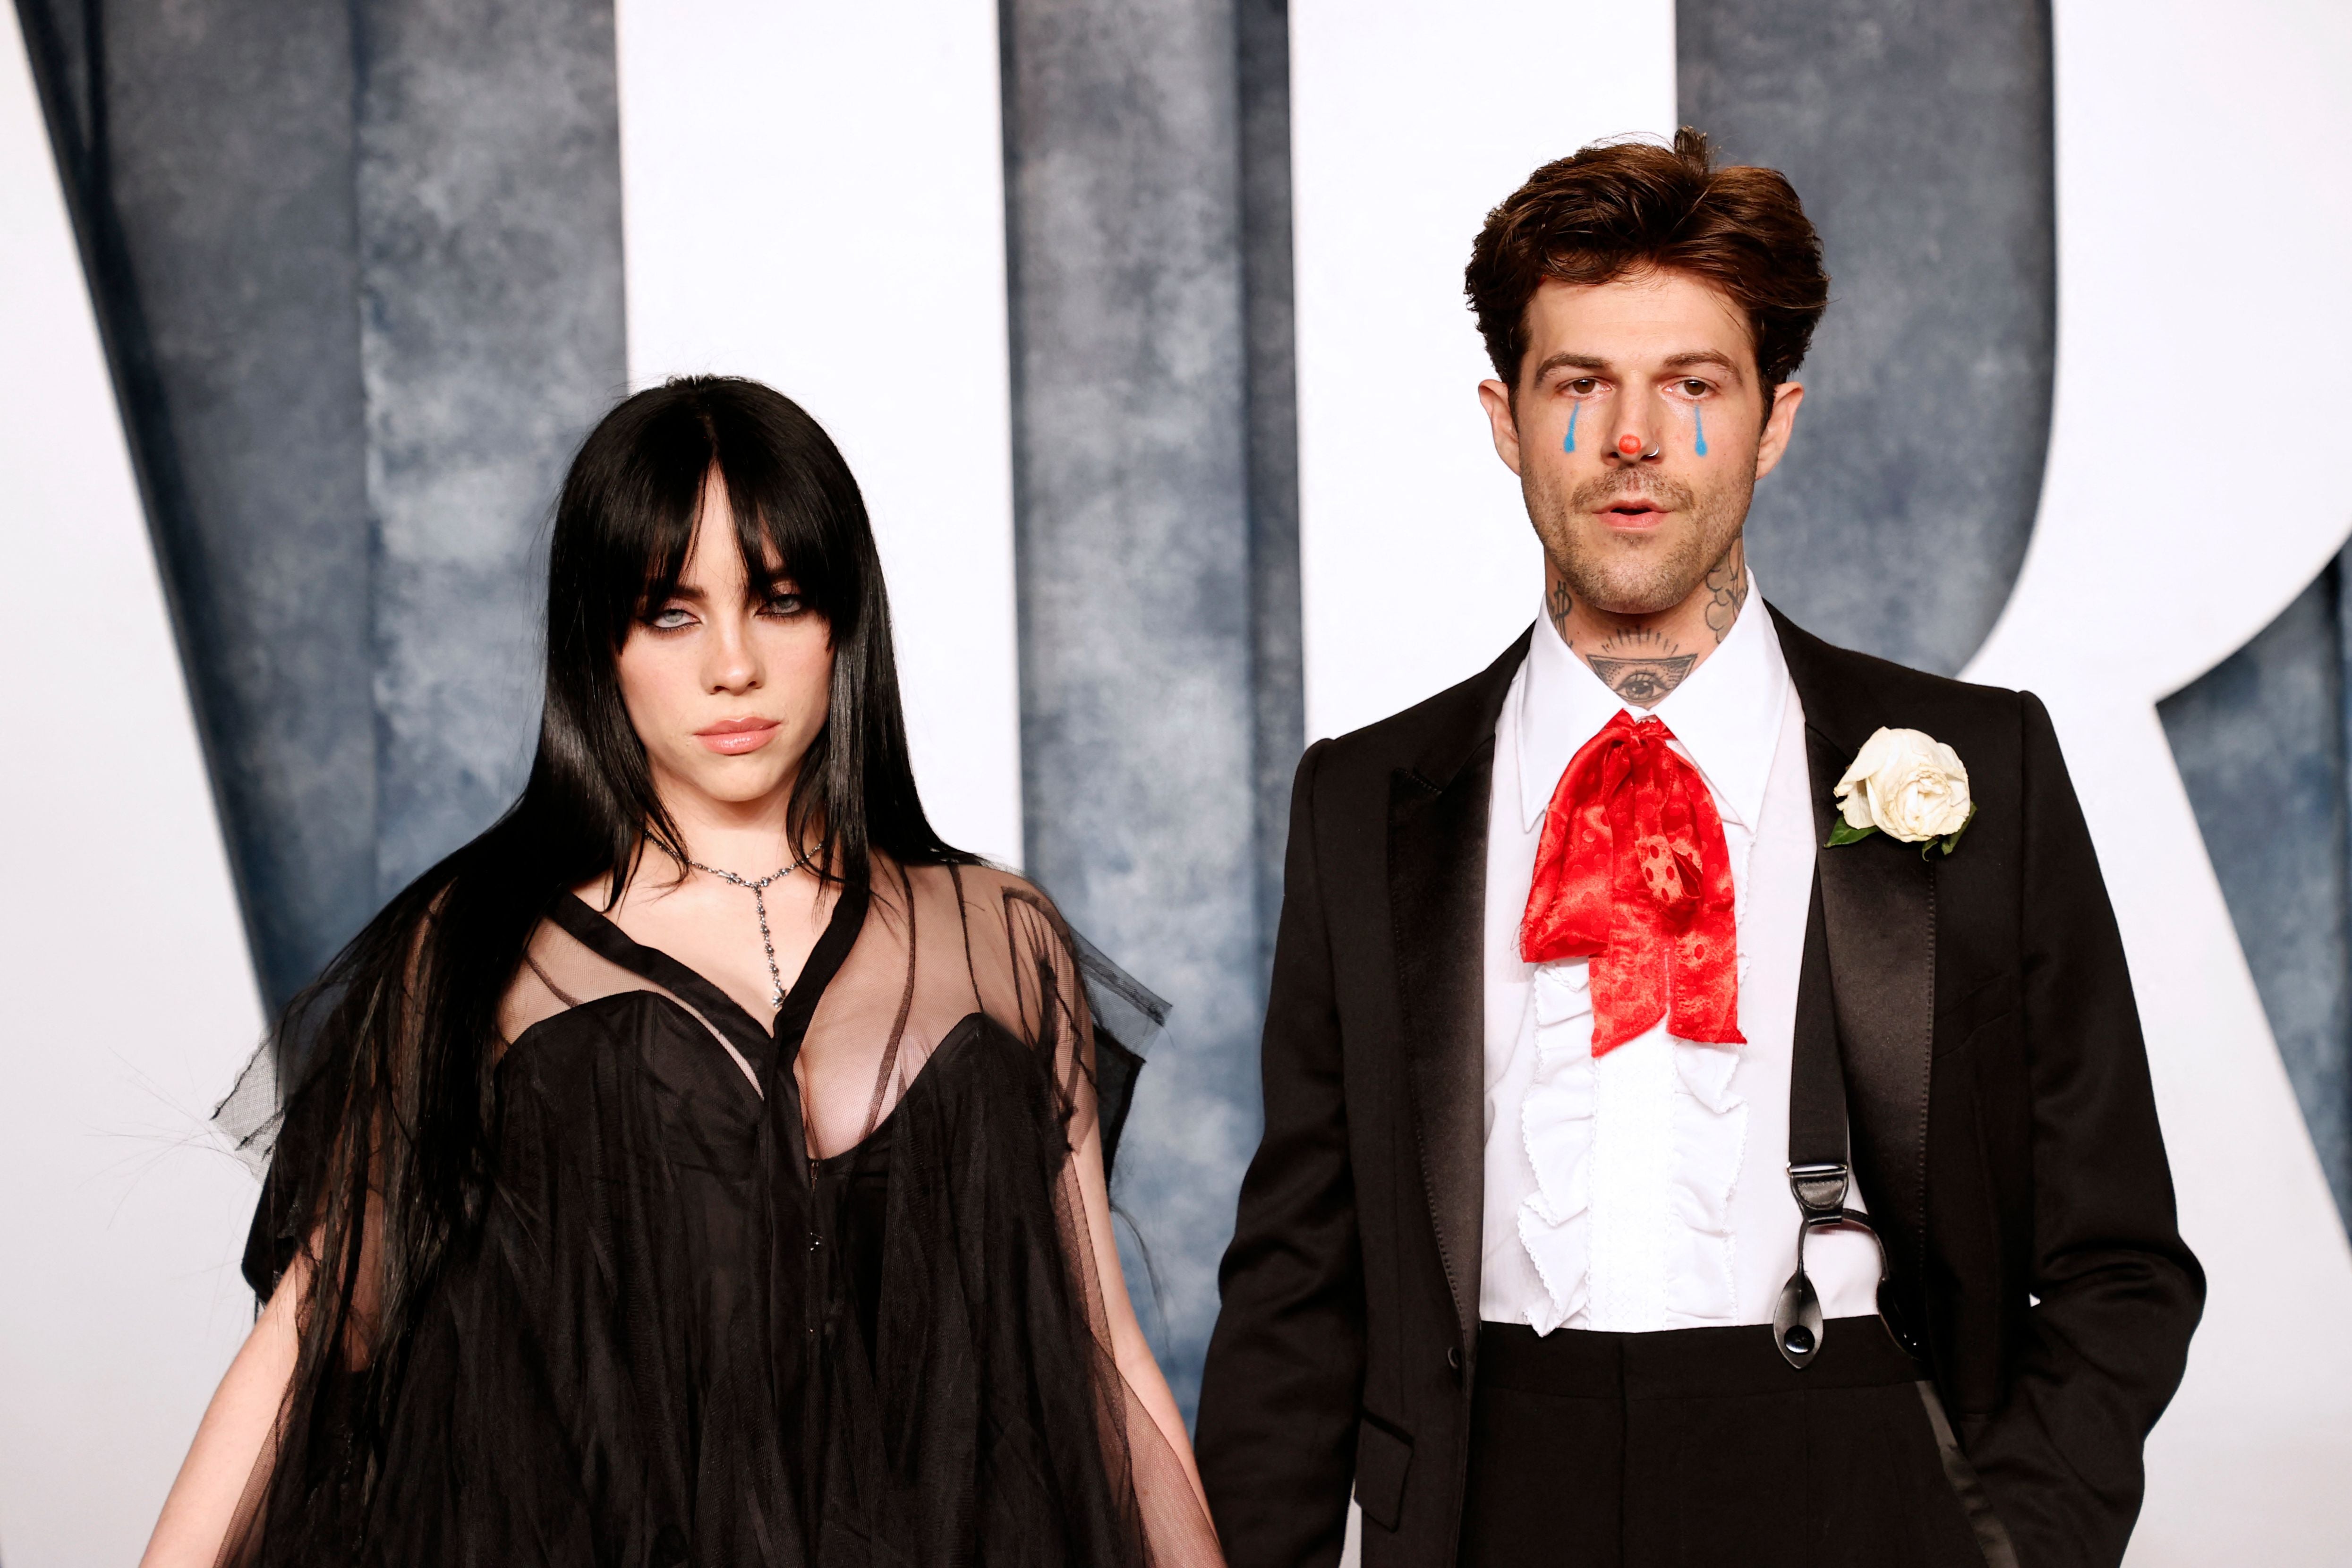 Billie Eilish and Jesse Rutherford attend Vanity Fair Oscars Party in March 2023